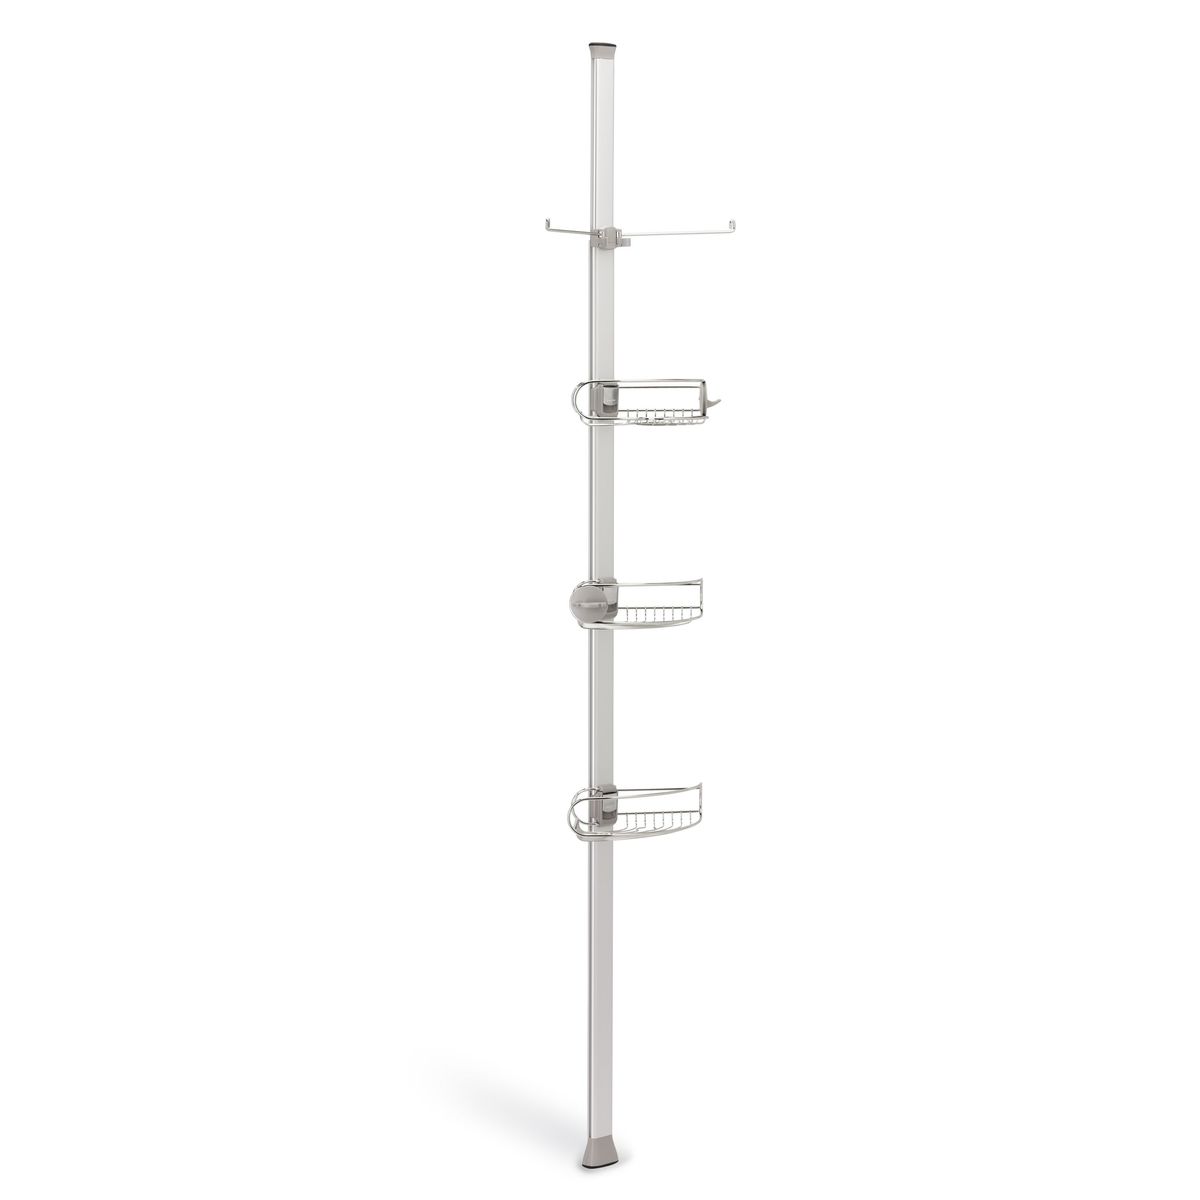 Tension Floor To Ceiling Shower Caddy, Floor To Ceiling Shower Caddy Black